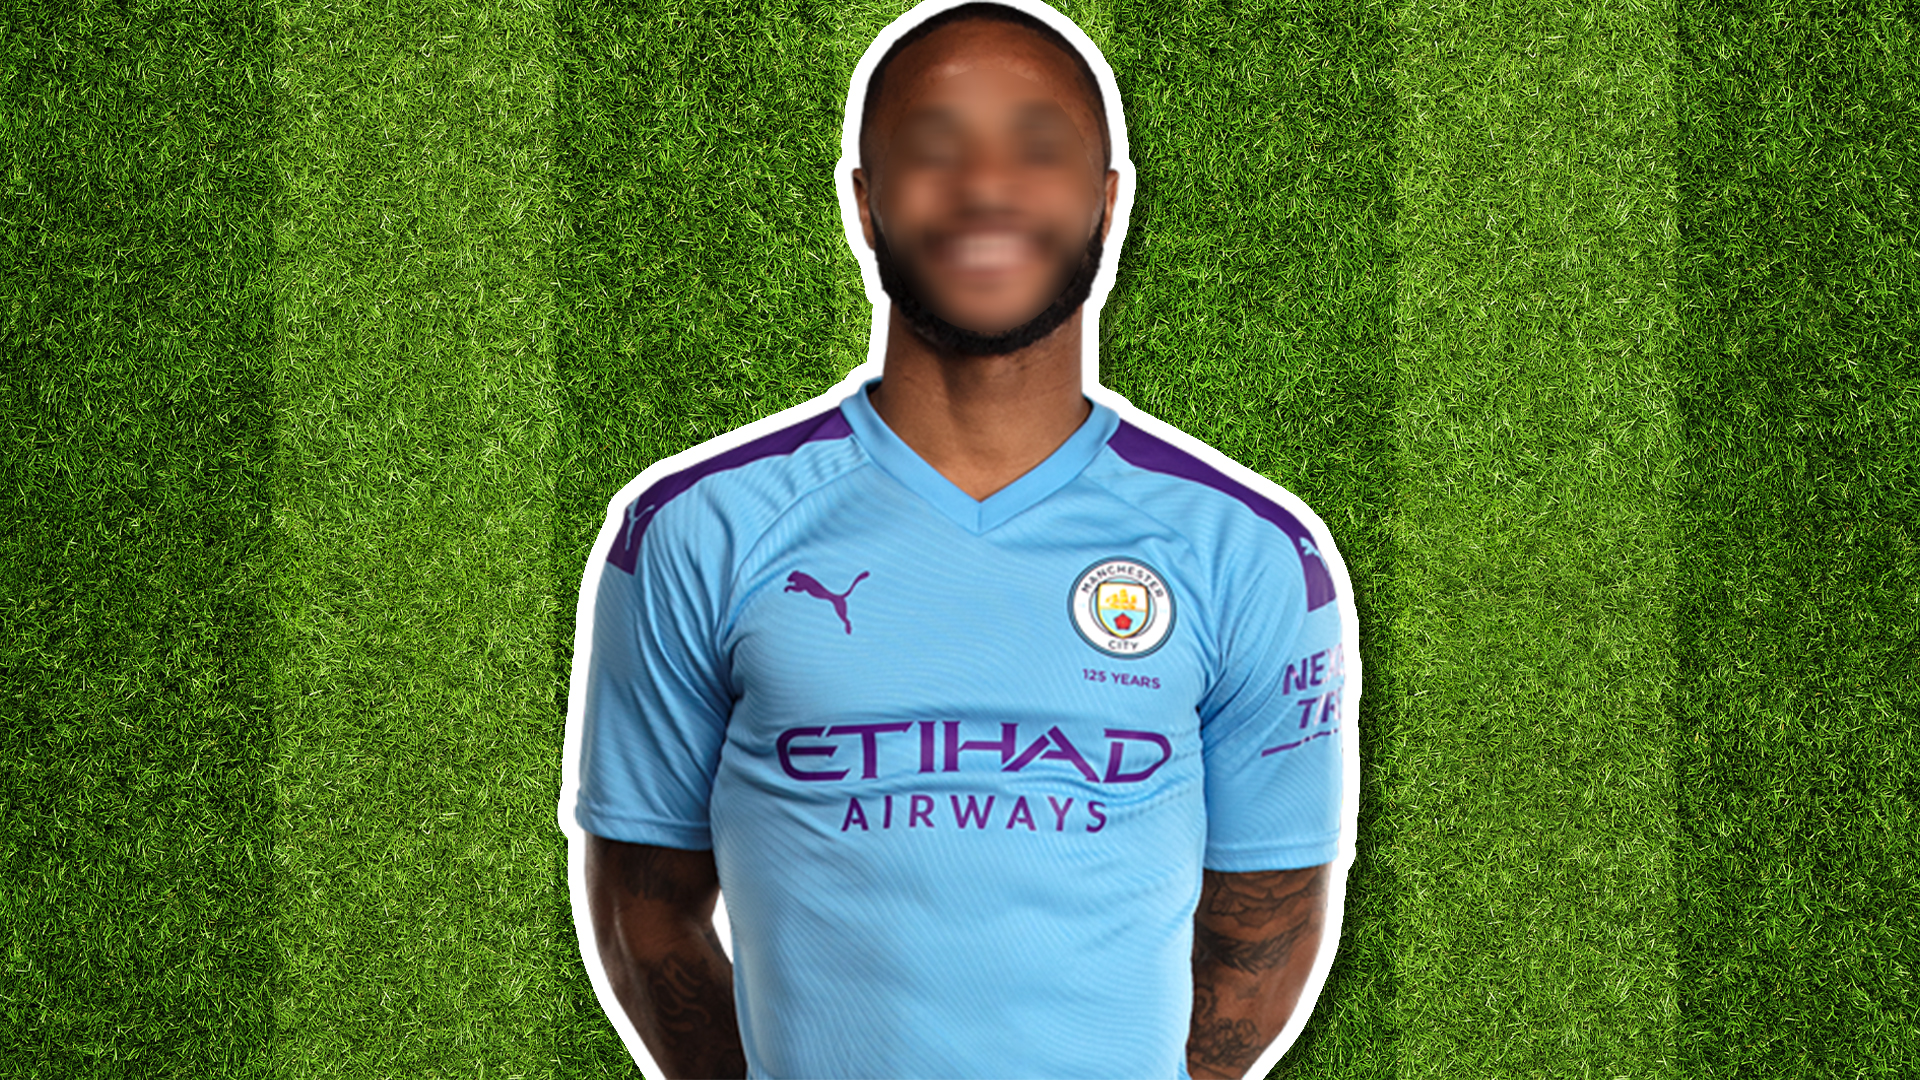 Manchester City player